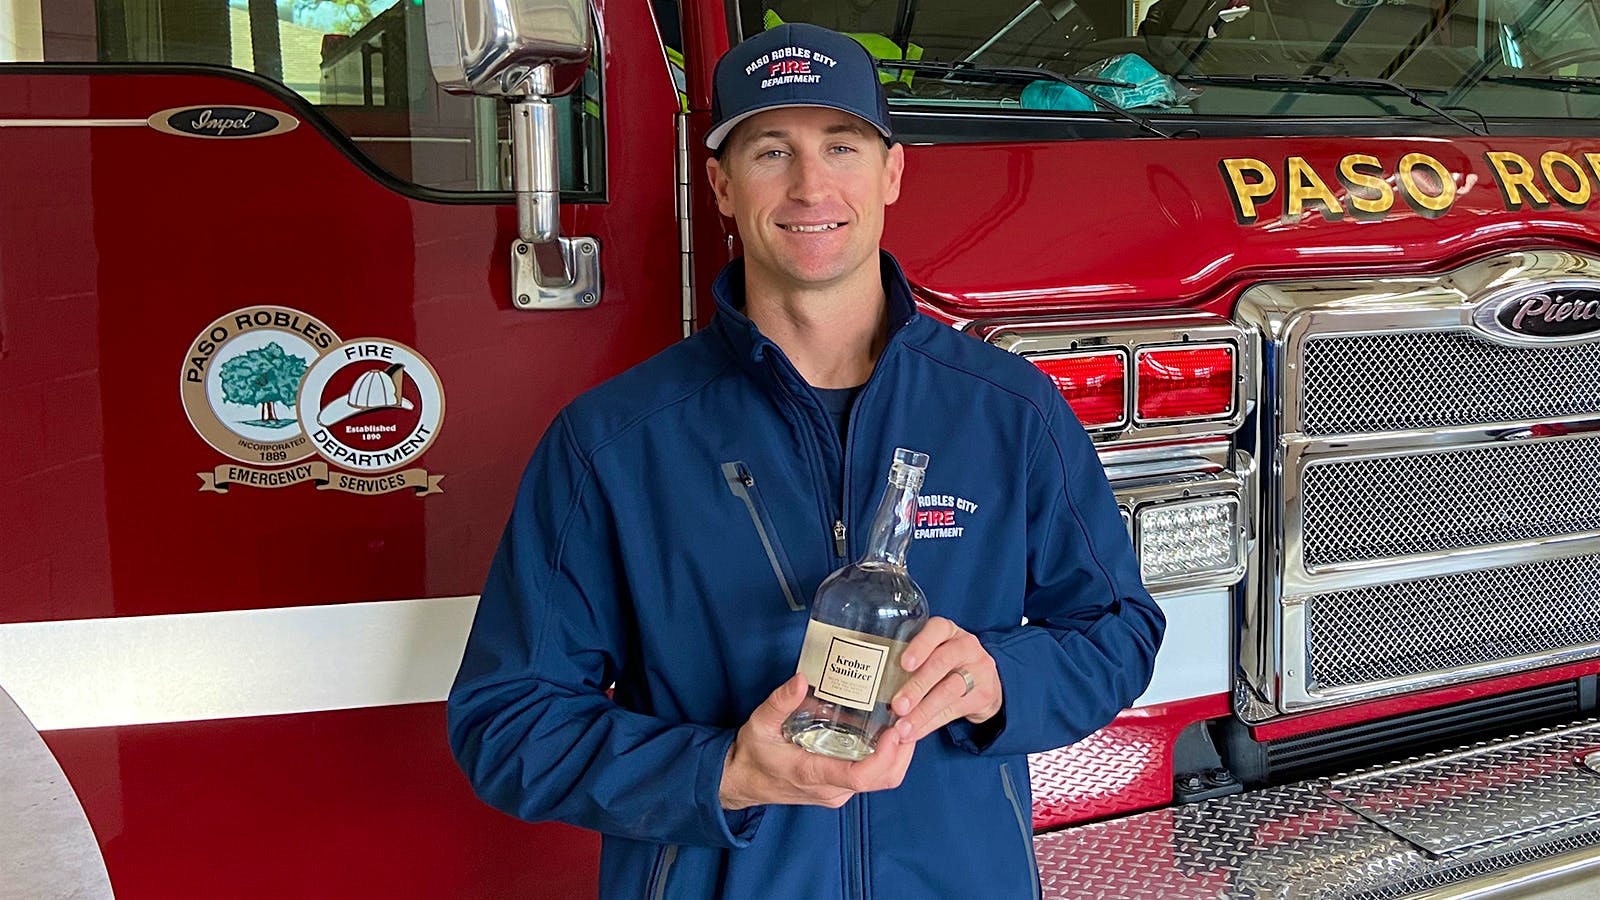 A Neat Solution: Distillers Make Artisanal Hand Sanitizer, Donate to First Responders